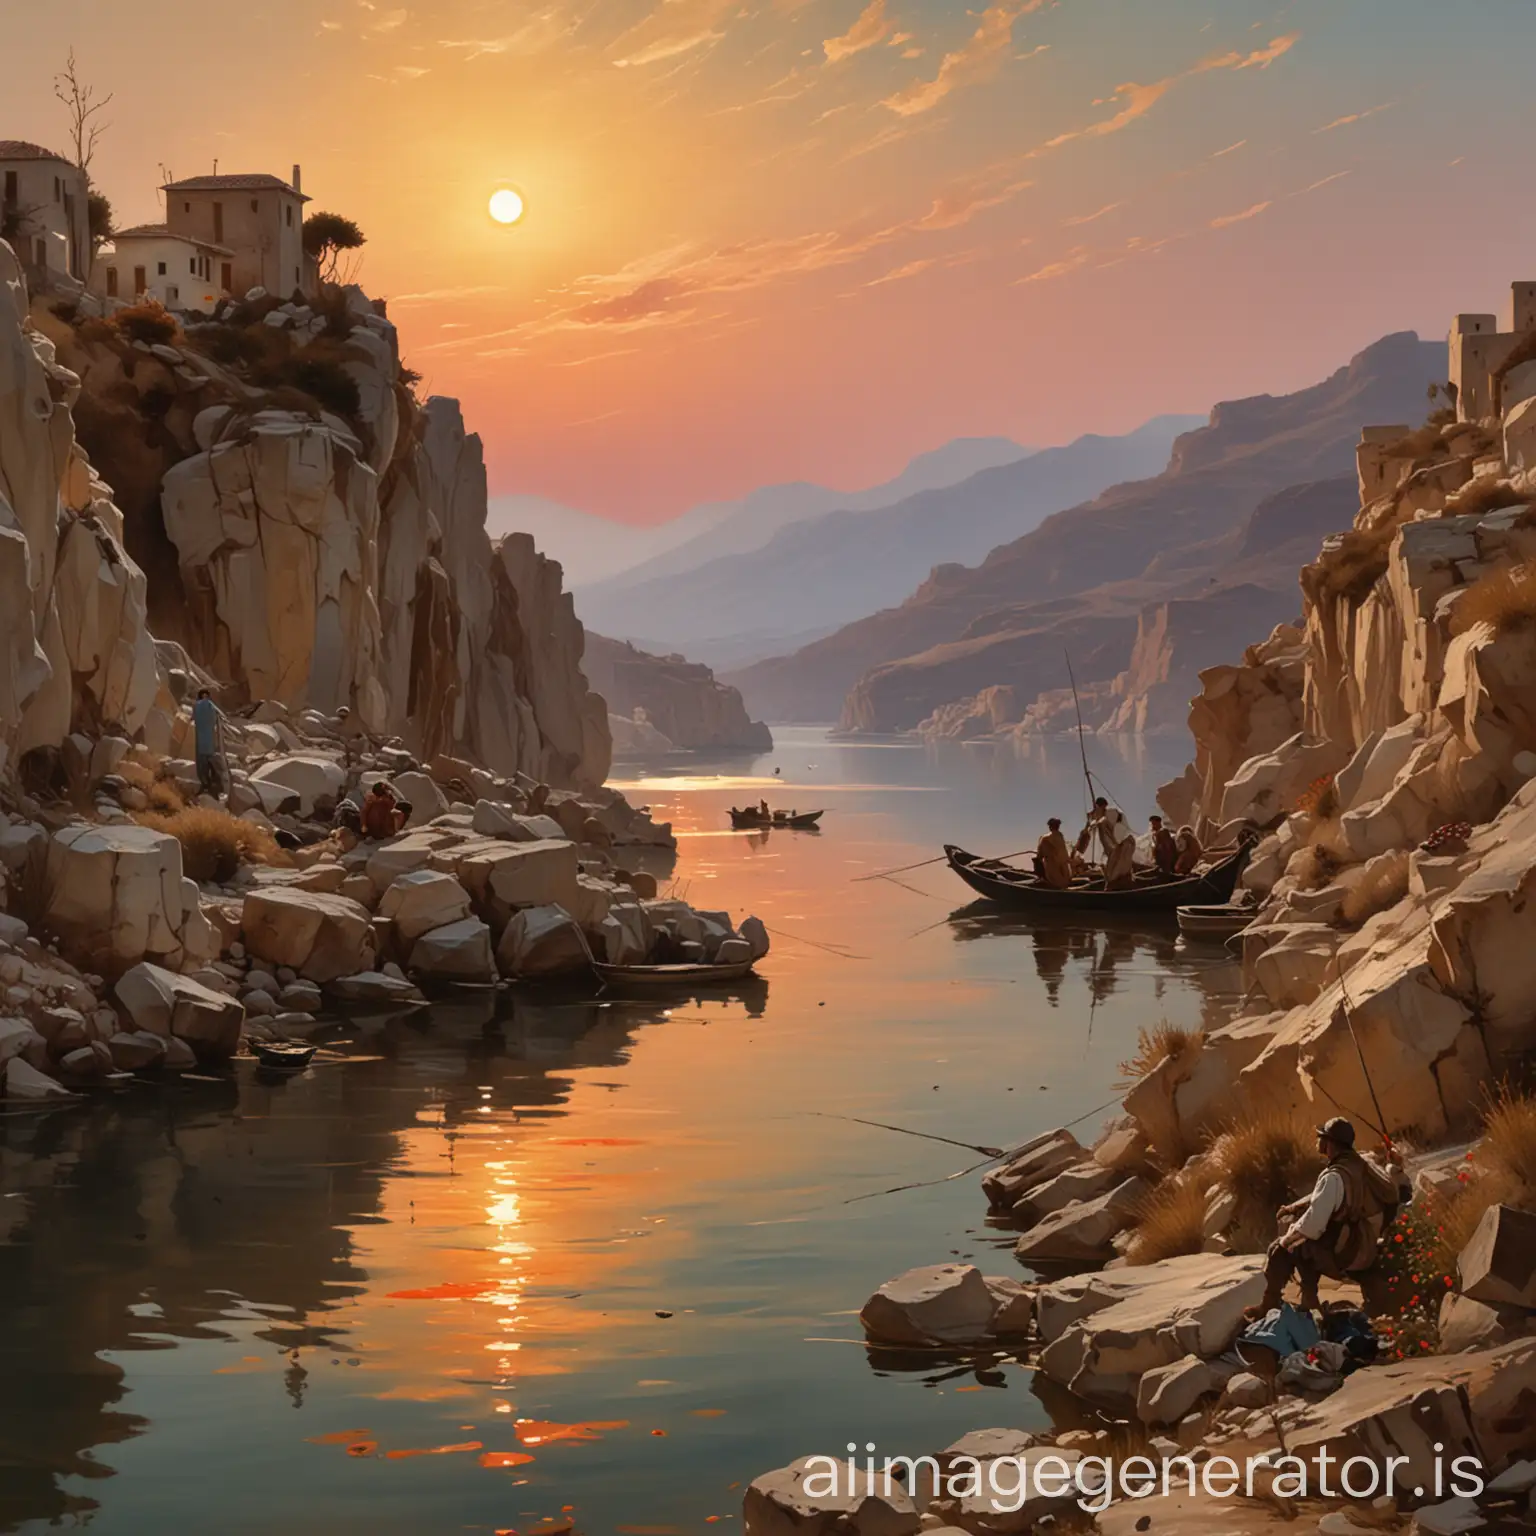 a sunset fishermen´s painting by John Singer Sargent levitated in a dystopian greek landscape